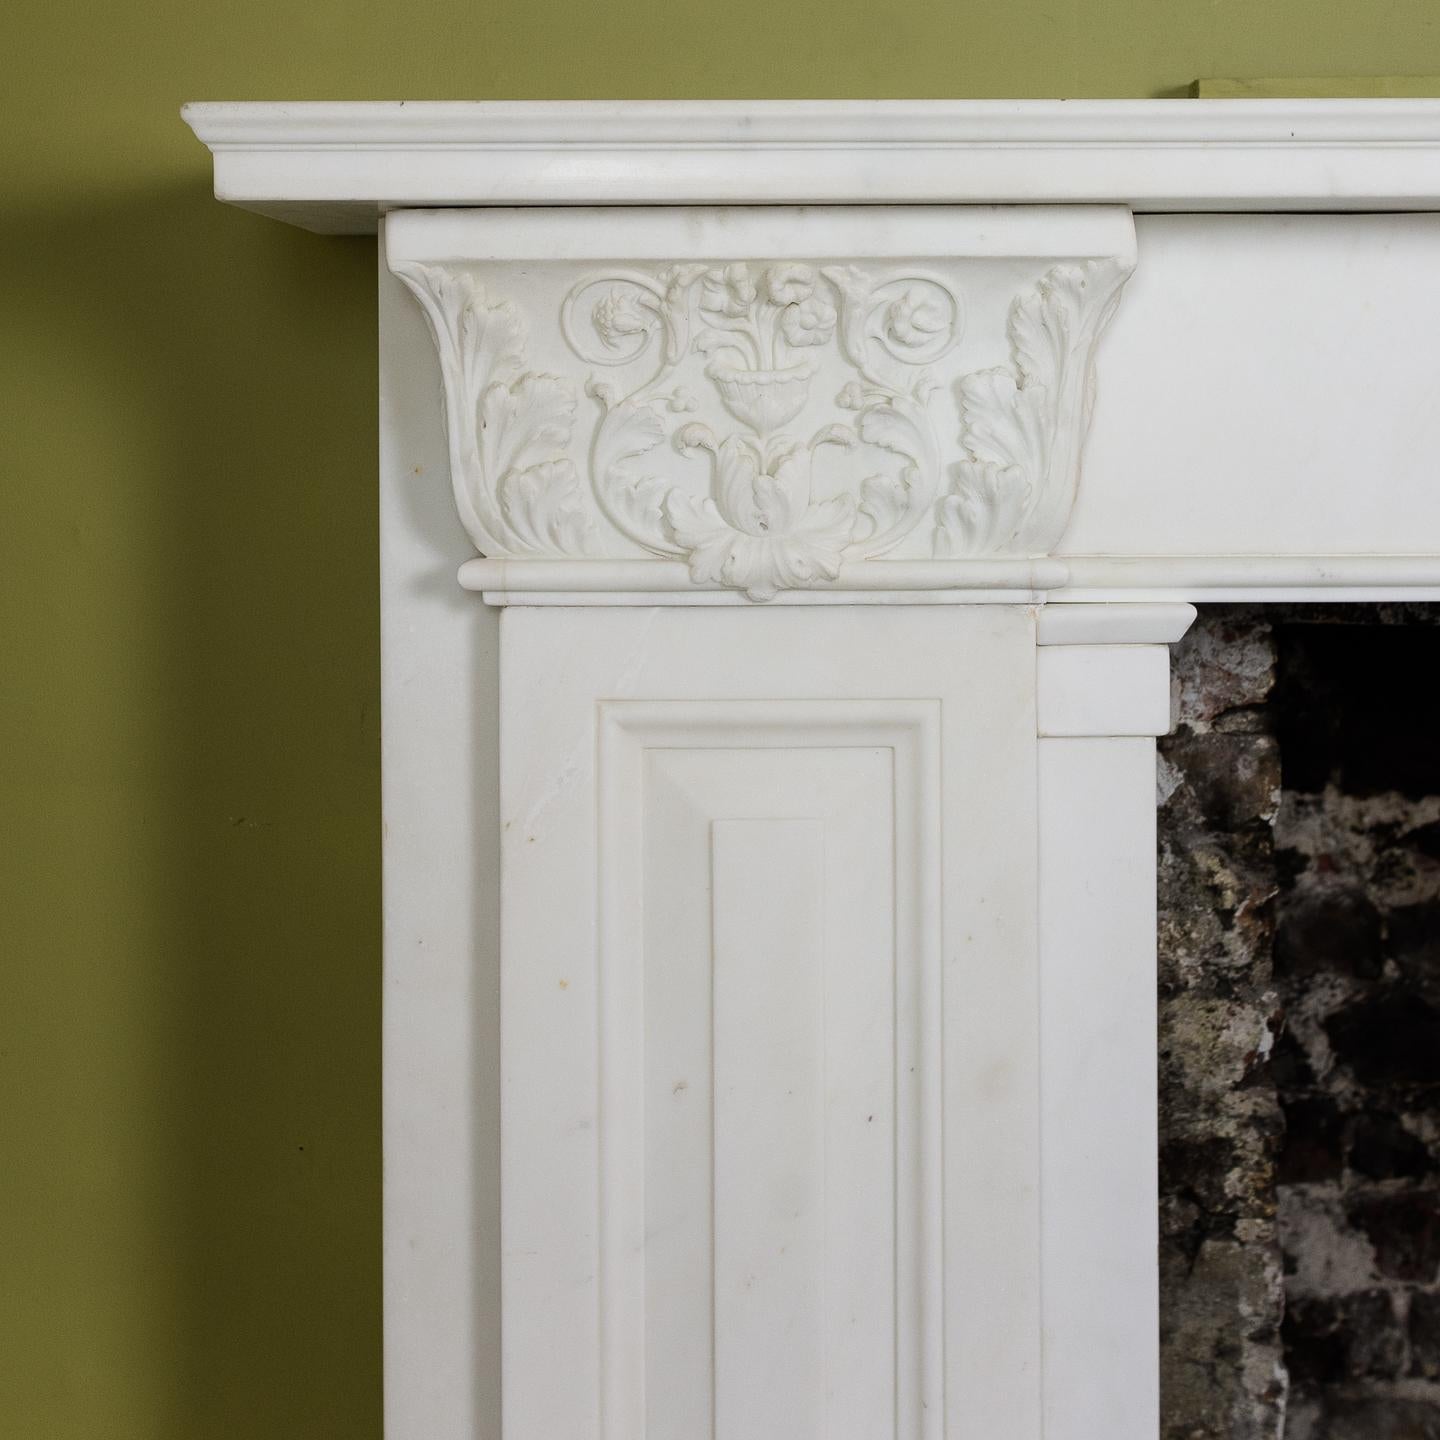 British The Theatre Royal Covent Garden Chimneypiece - Regency Marble Fireplace